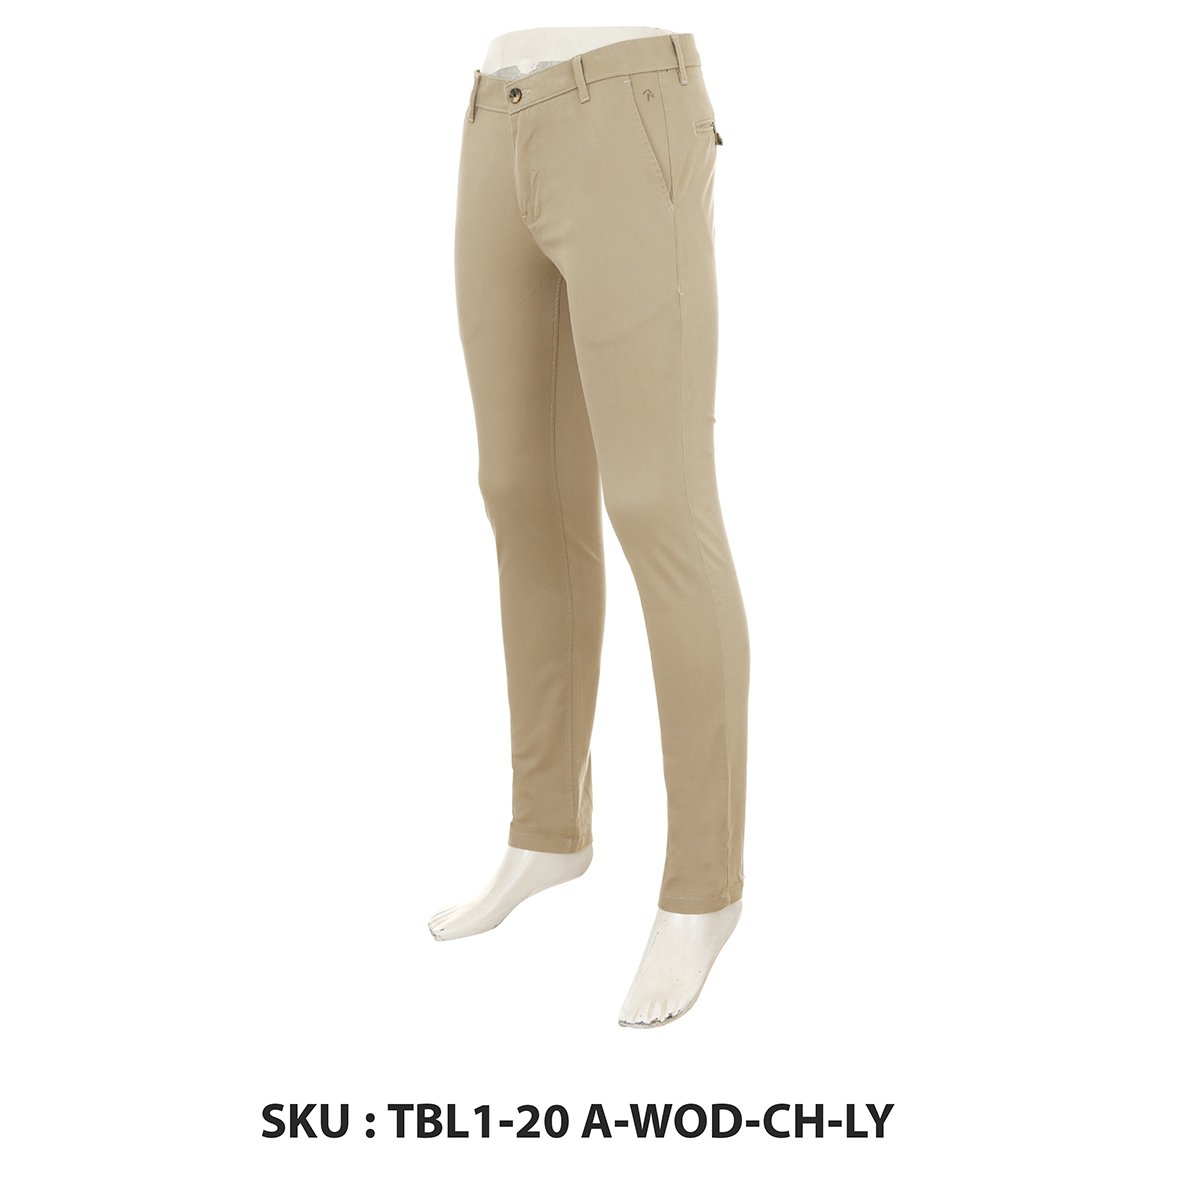 Classic Polo Mens Trousers Tbl1-20 A-Wod-Ch-Ly Wood 36